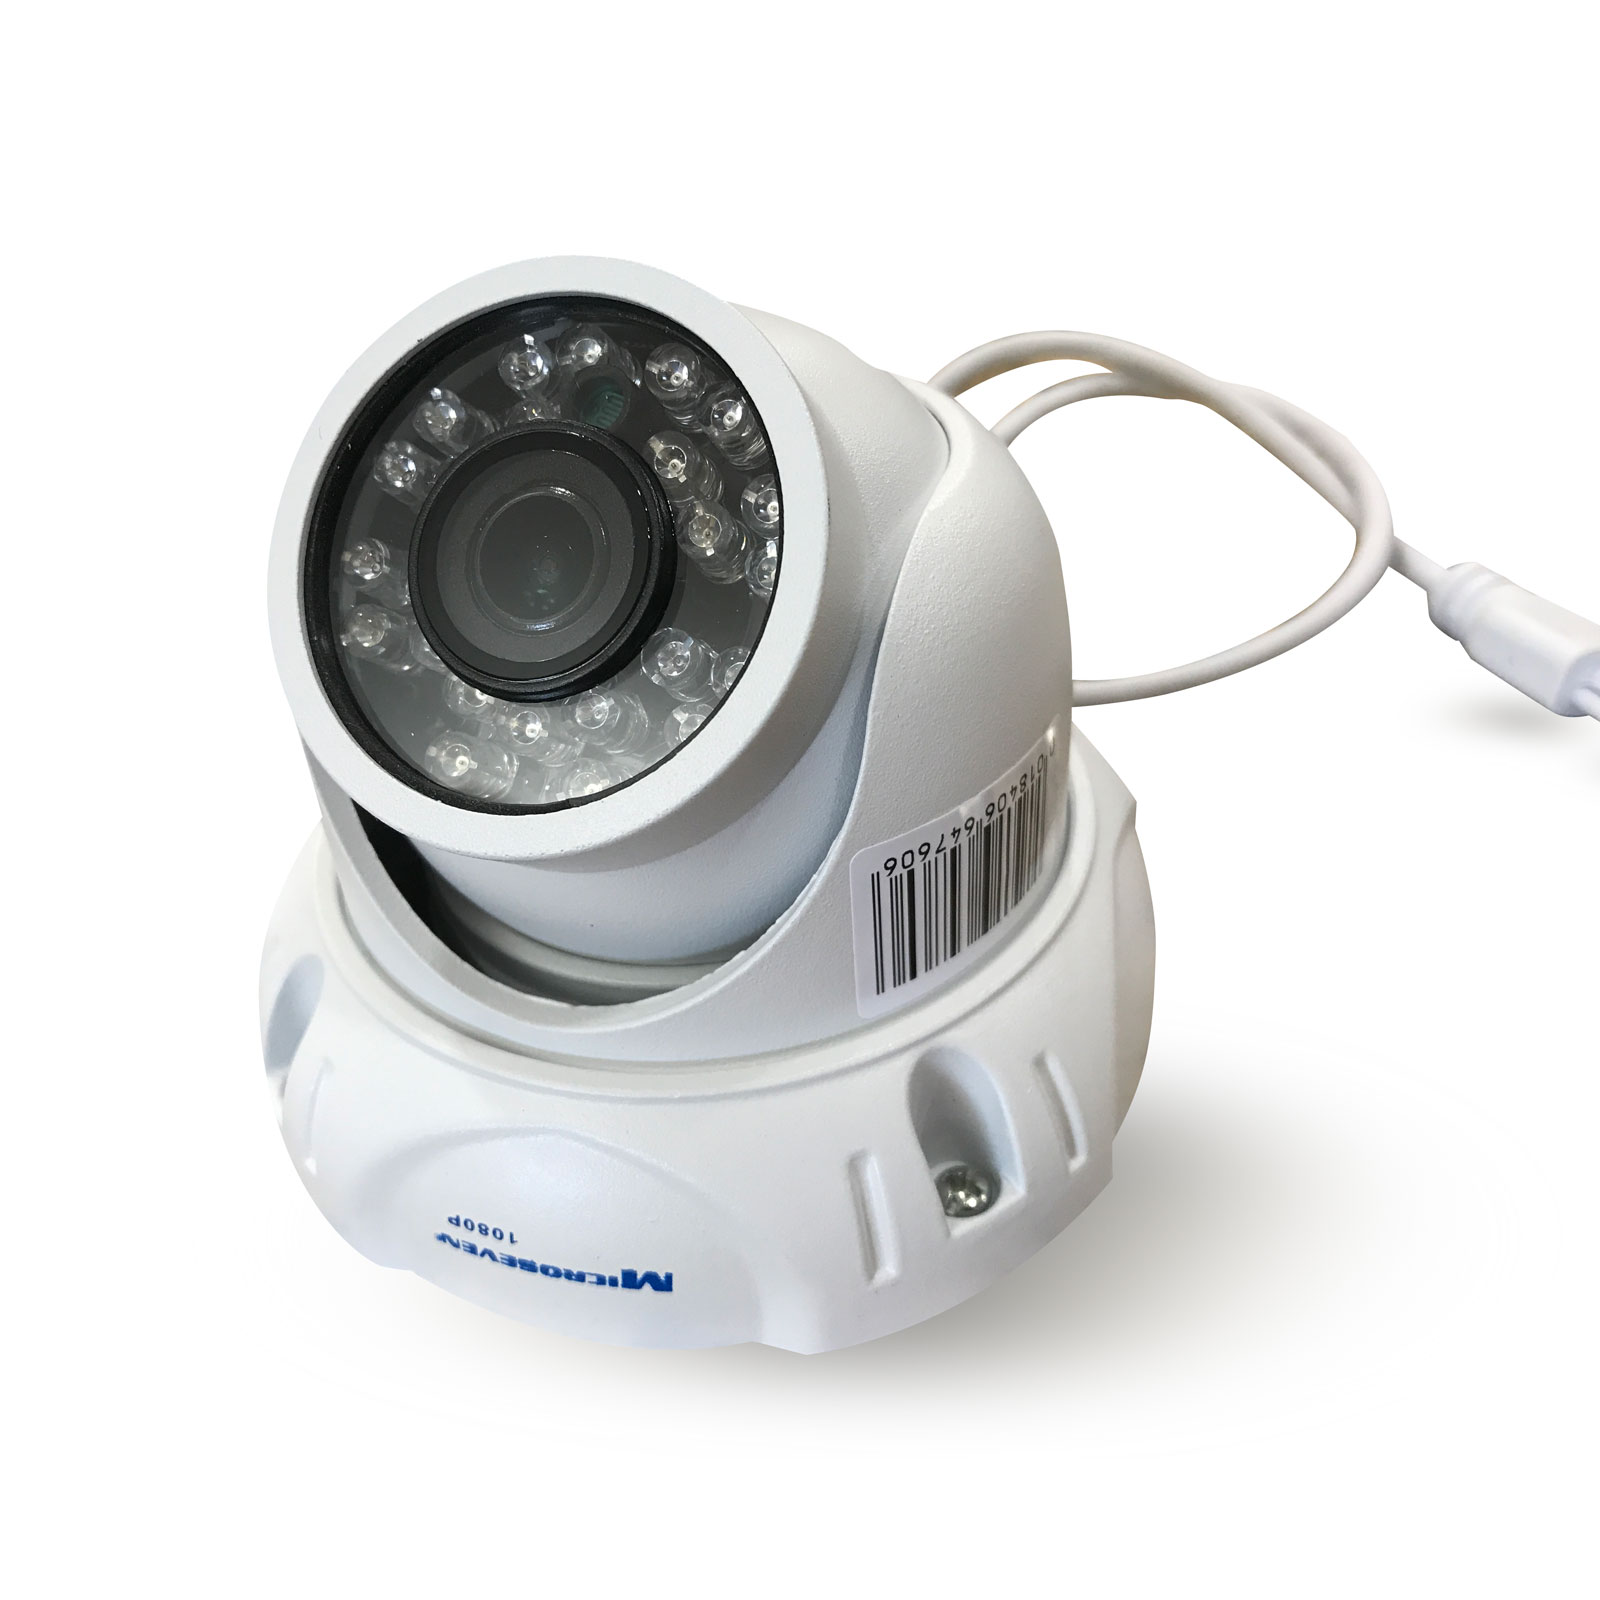 Microseven Open Source ProHD 1080P / 30fps 1/2.5" COMS Ultra-Wide View Angle (150°) 3MP Lens +Two Way Audio P2P Dome IP Camera Build-in POE Day & Night Indoor / Outdoor-Compatible with Any ONVIF NVR, Web GUI & Apps, VMS (Video Management System), Free M7 Cloud and Free Live Streaming on microseven.tv (With Built-in POE)/ Works with Alexa